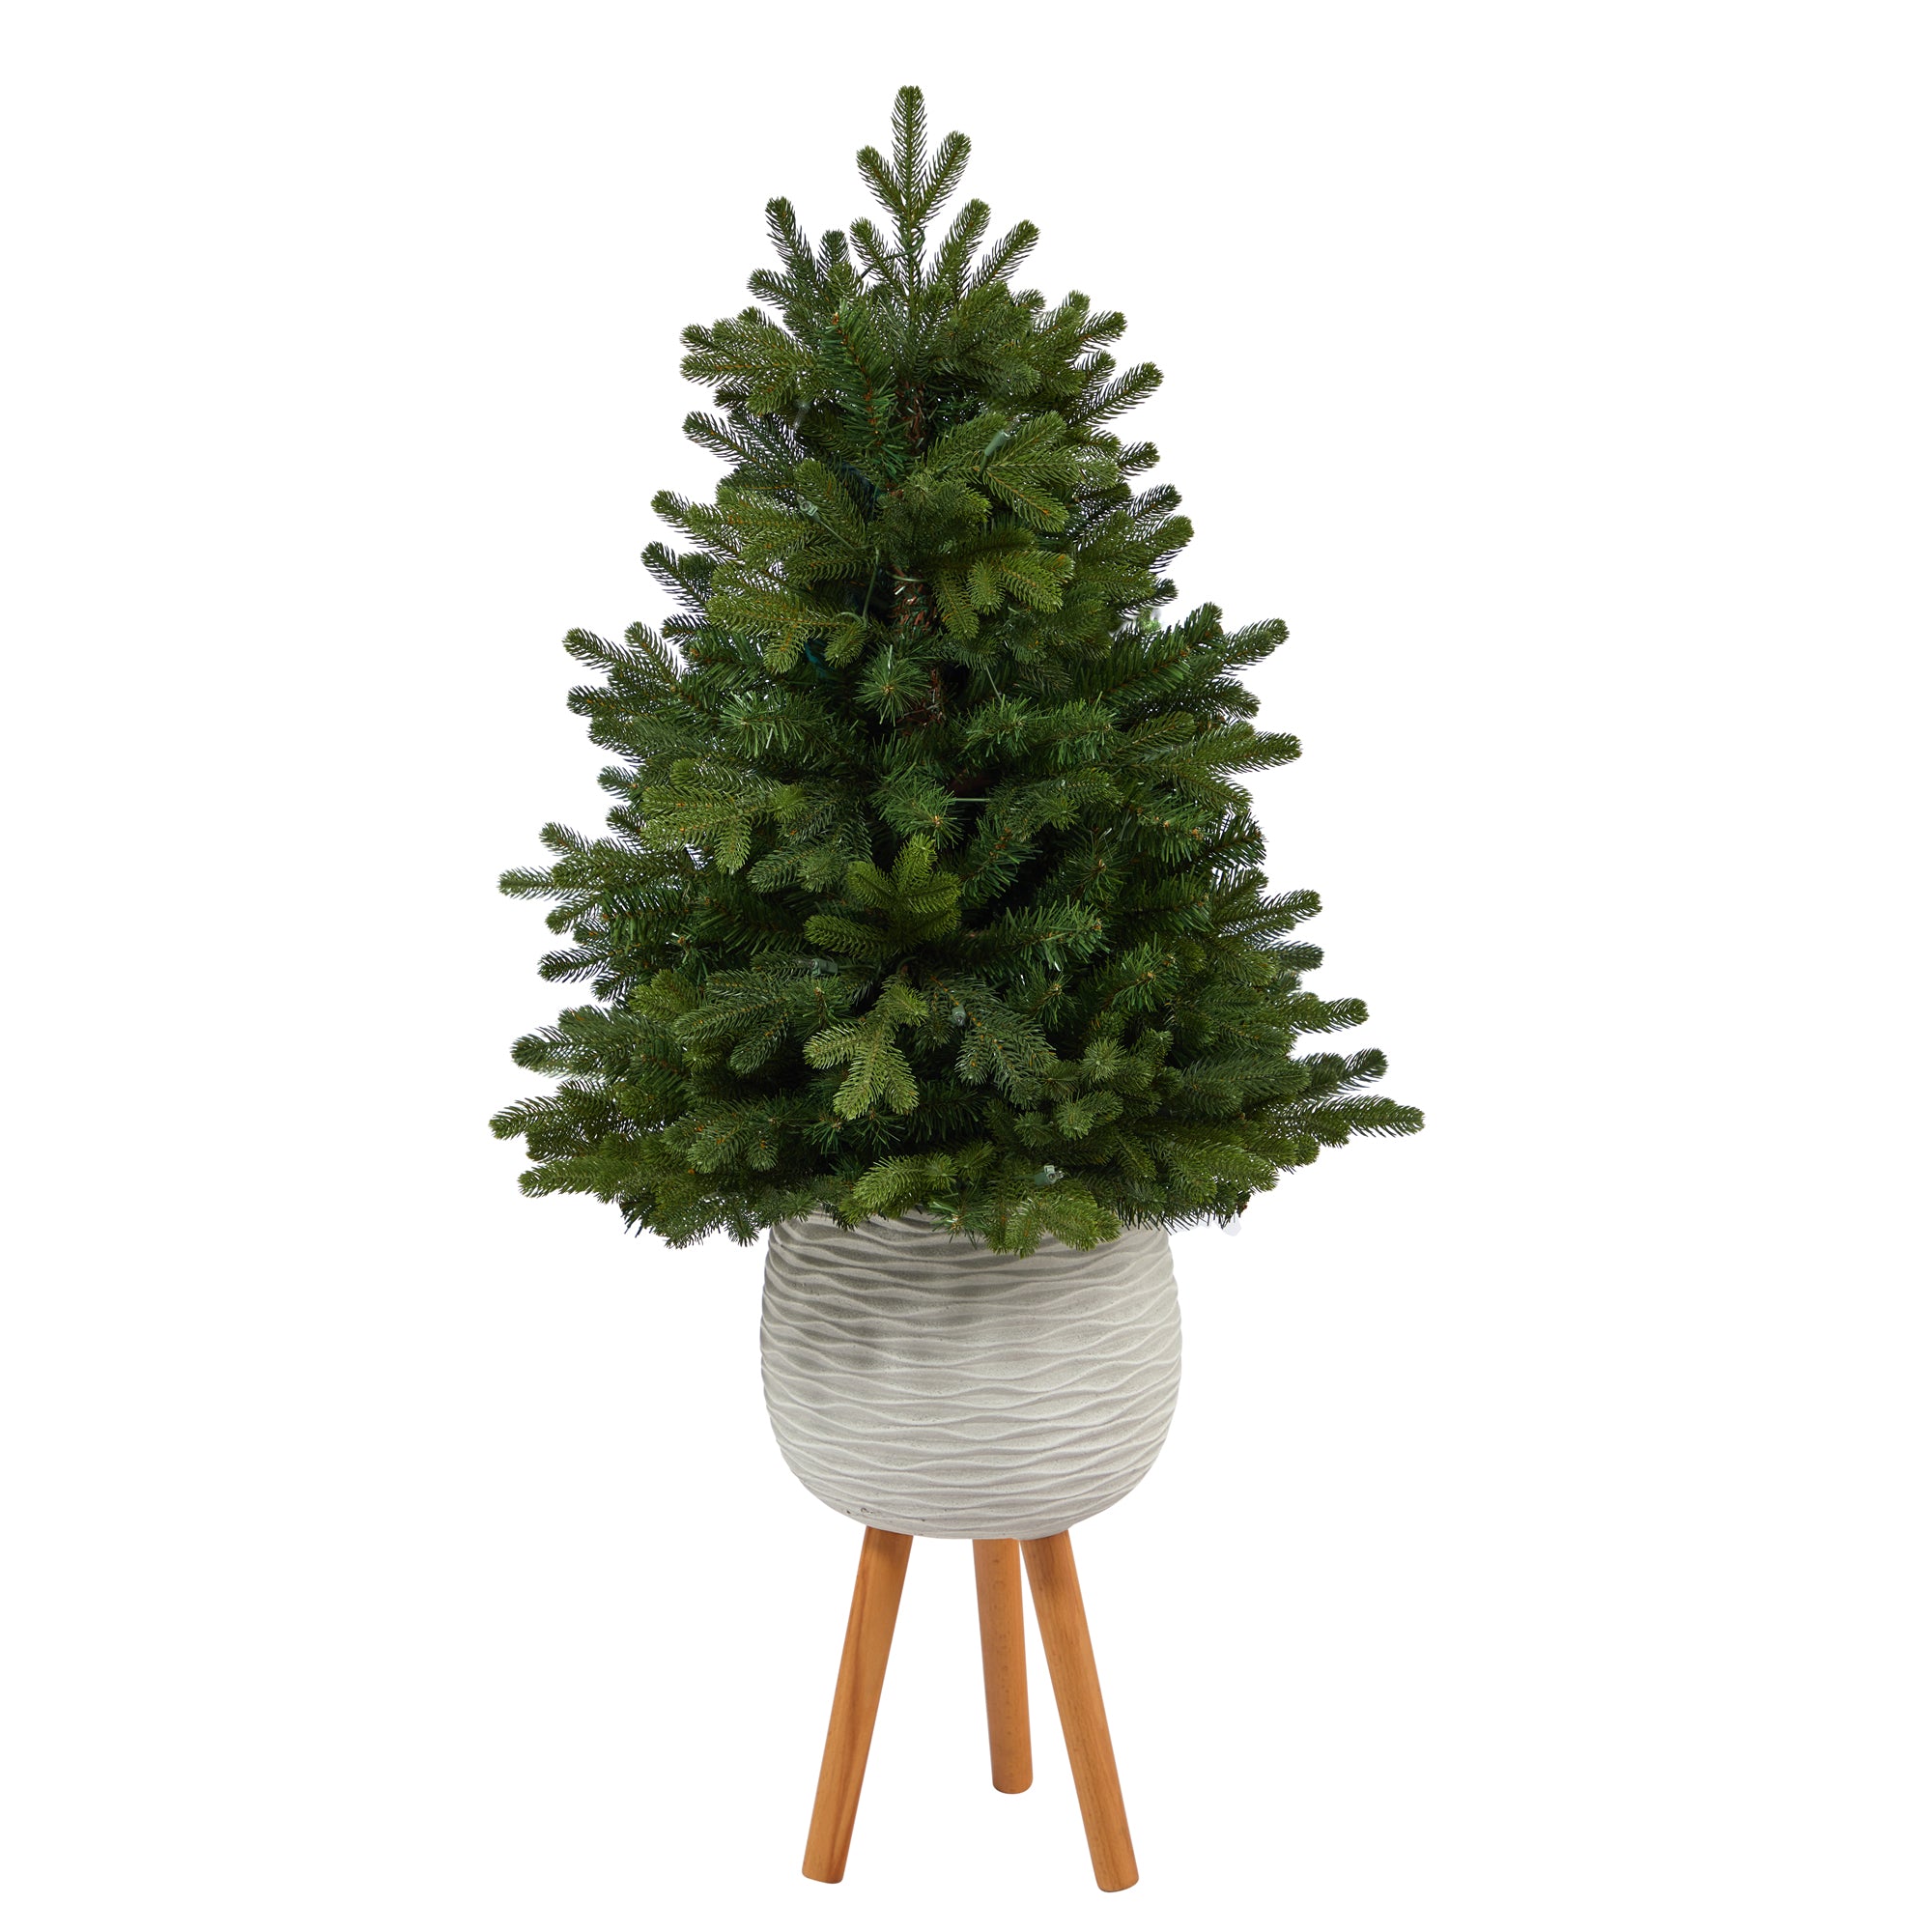 4' Washington Fir Artificial Christmas Tree with 50 Clear Lights in White Planter with Decorative Planter Stand